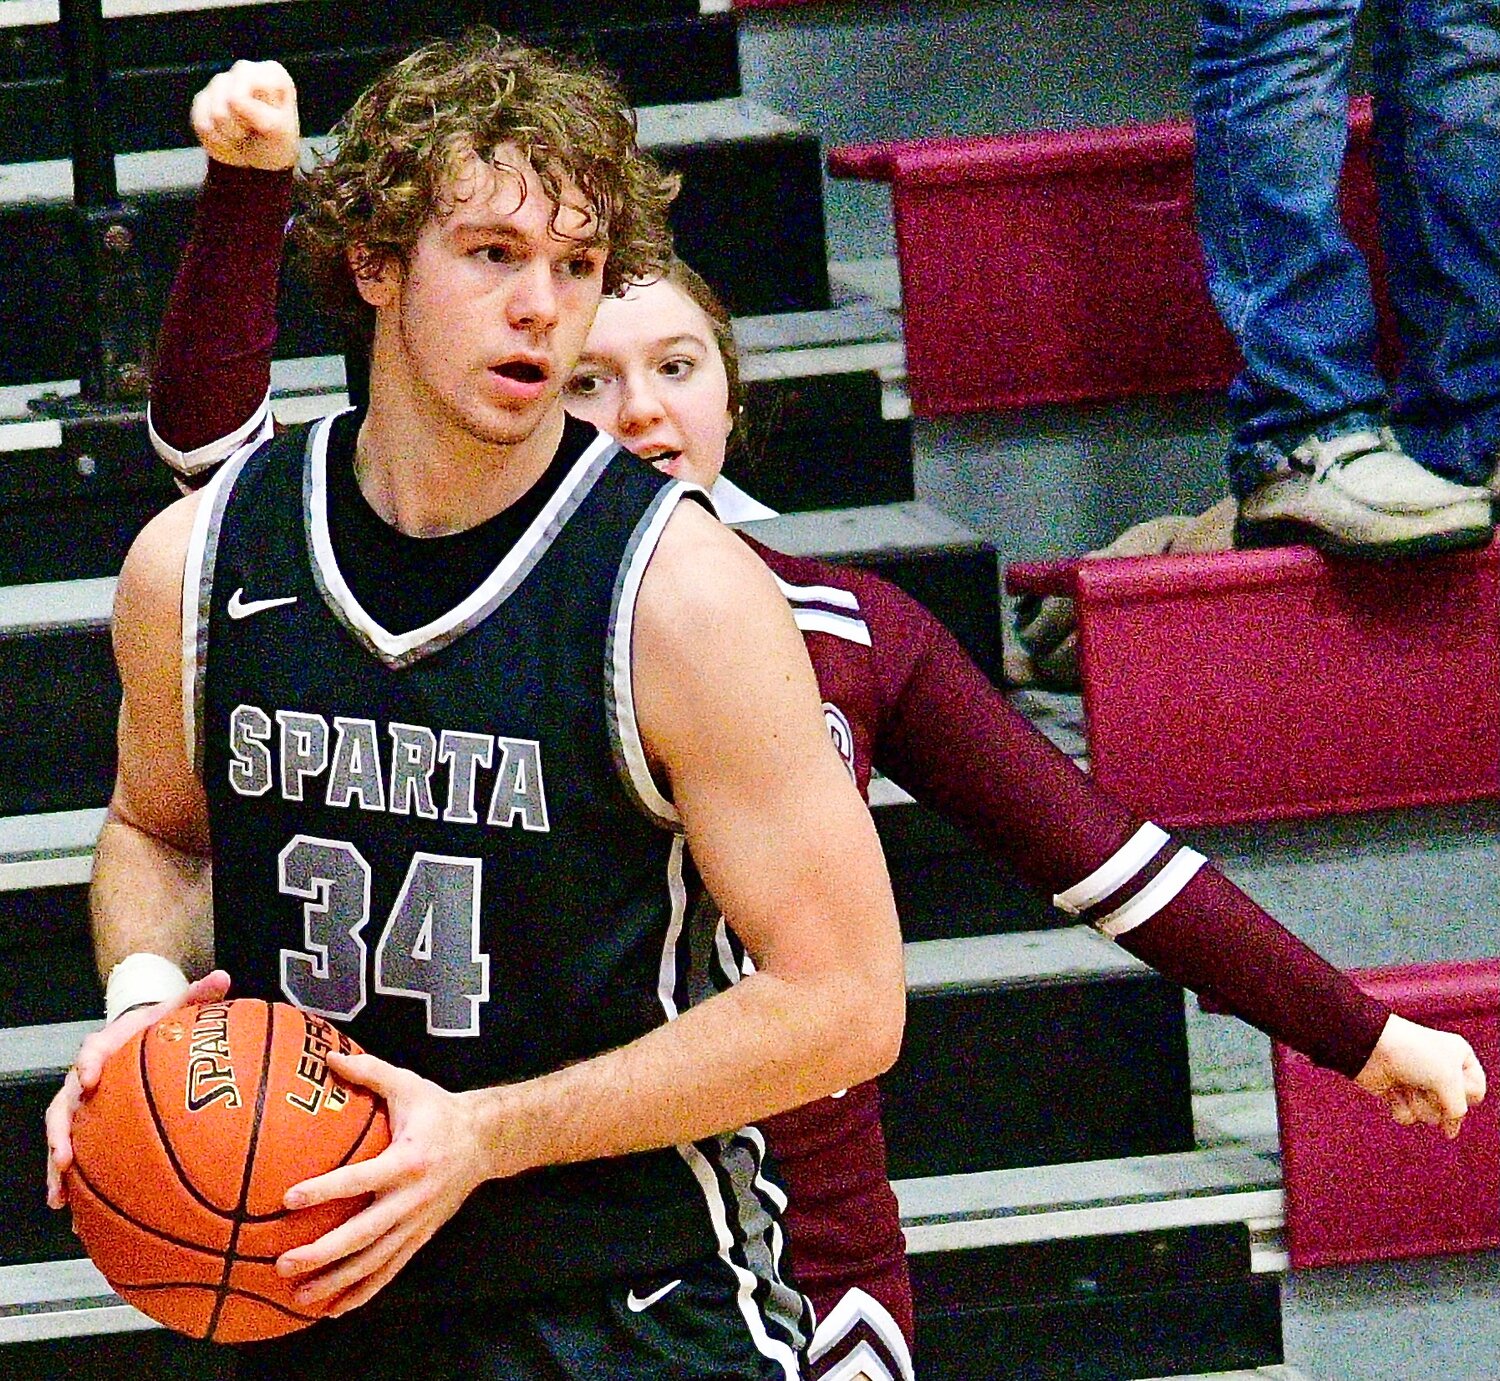 SPARTA'S JAKE LAFFERTY and the Trojans are off to a 4-0 start.